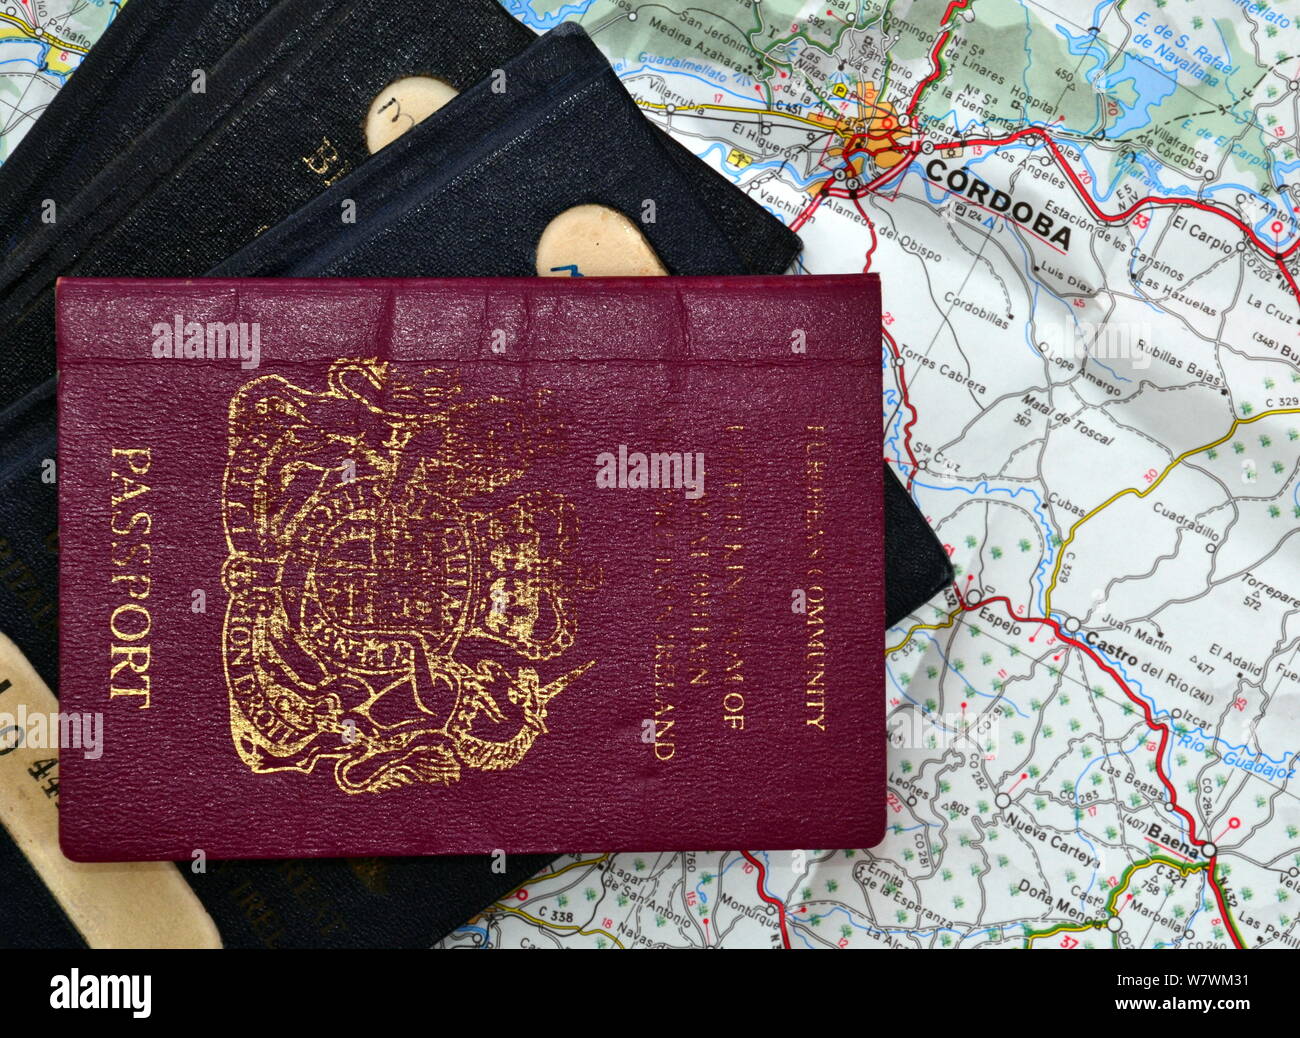 British passports on a map of part of Spain, including the city of Cordoba Stock Photo